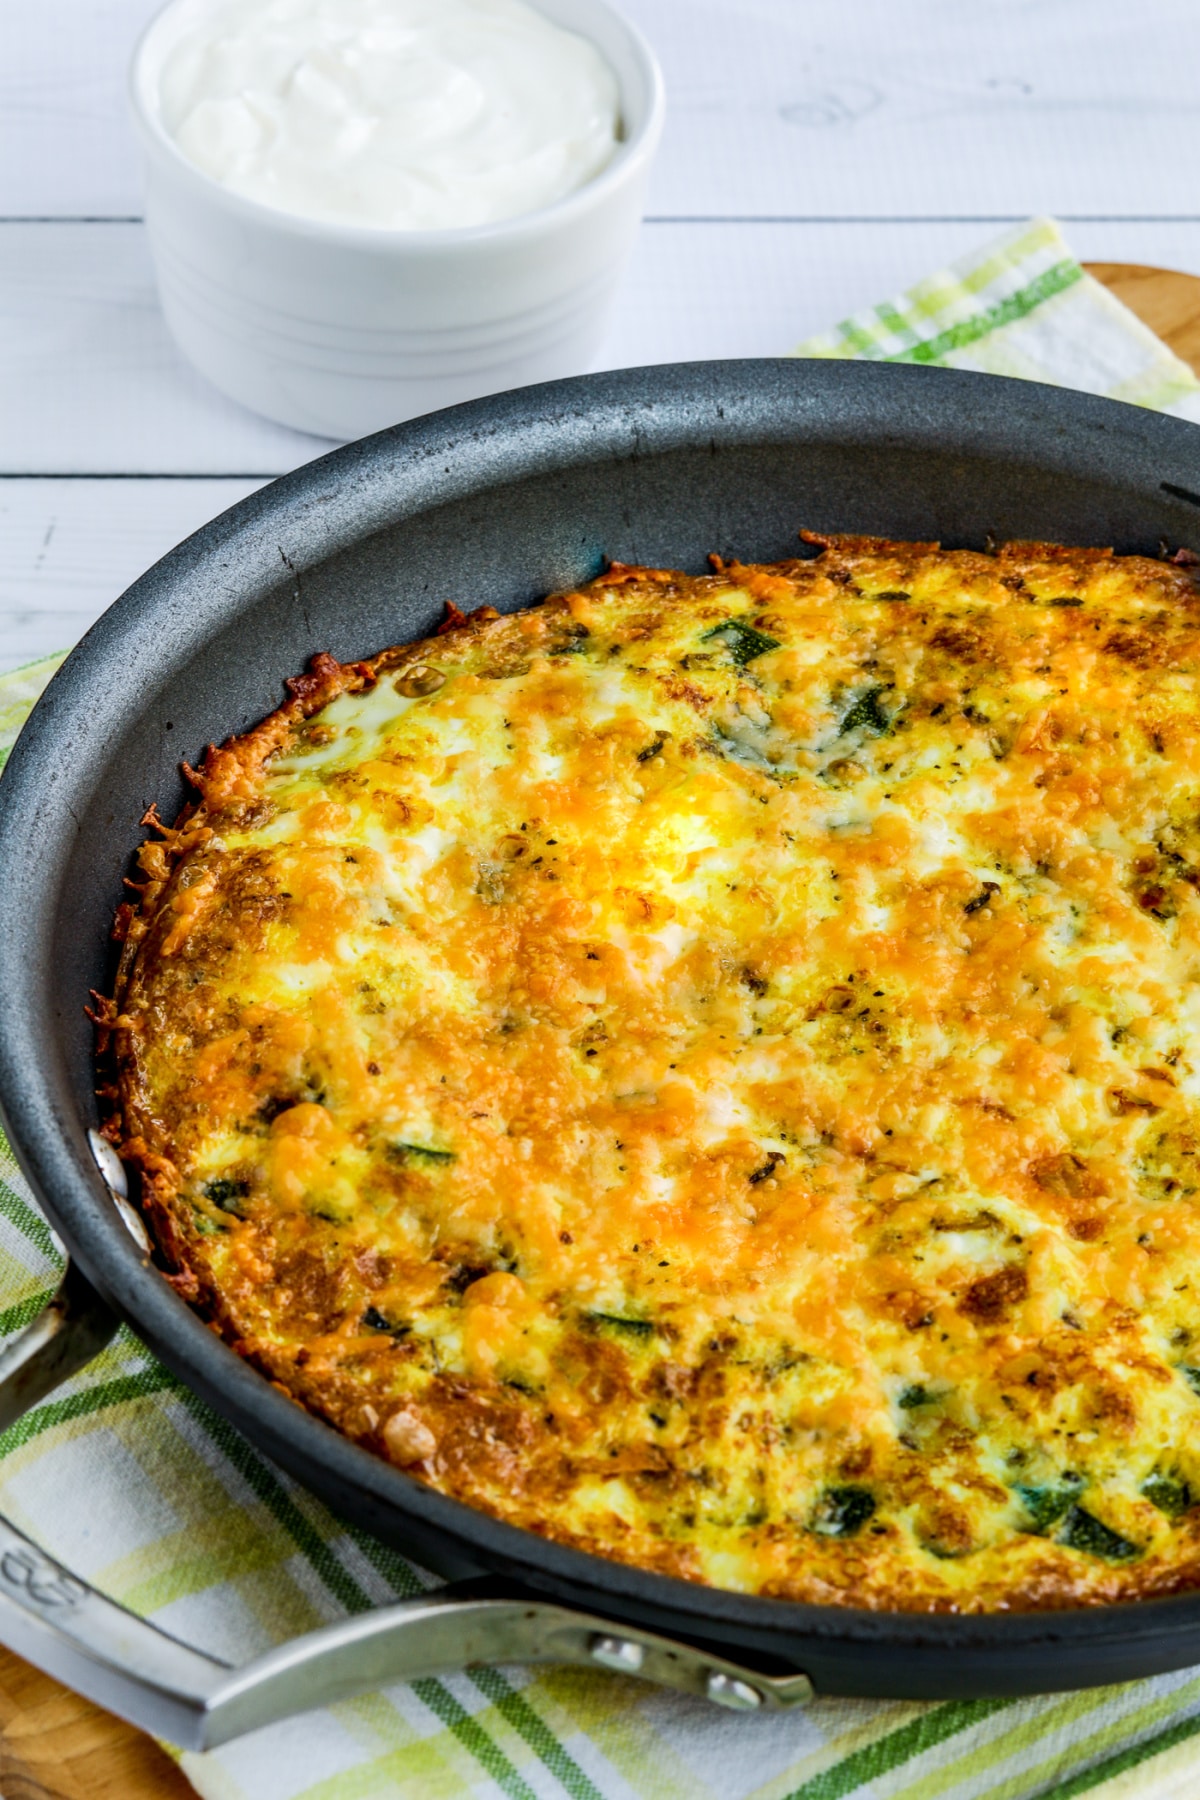 Zucchini Frittata shown in pan with sour cream in background